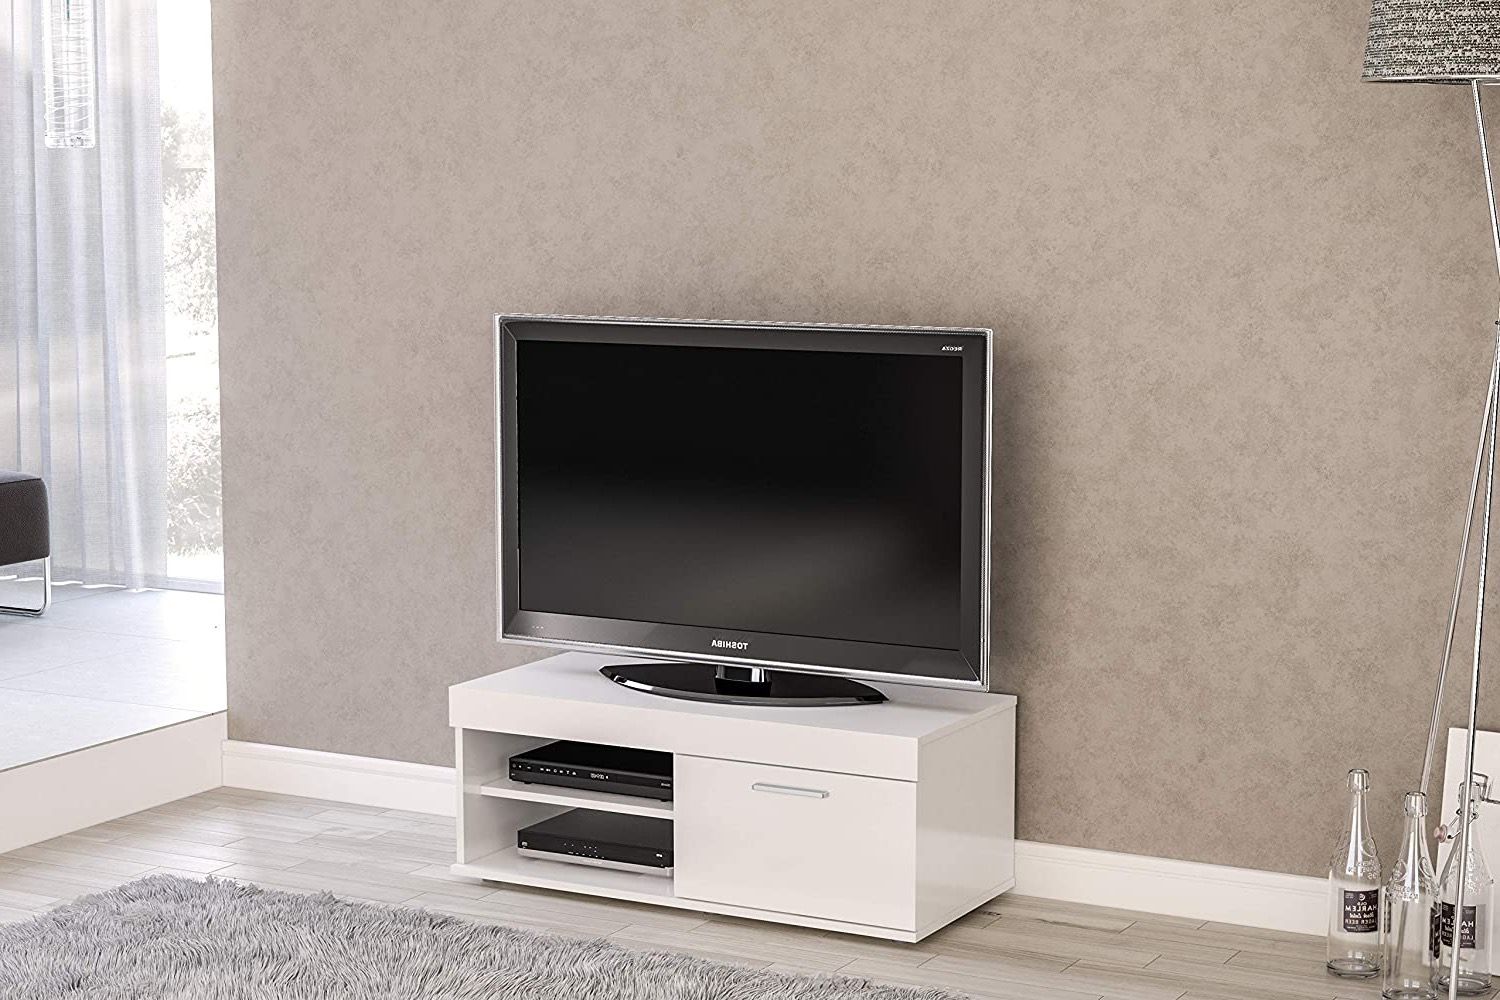 Edgeware Small Tv Stands (View 6 of 10)